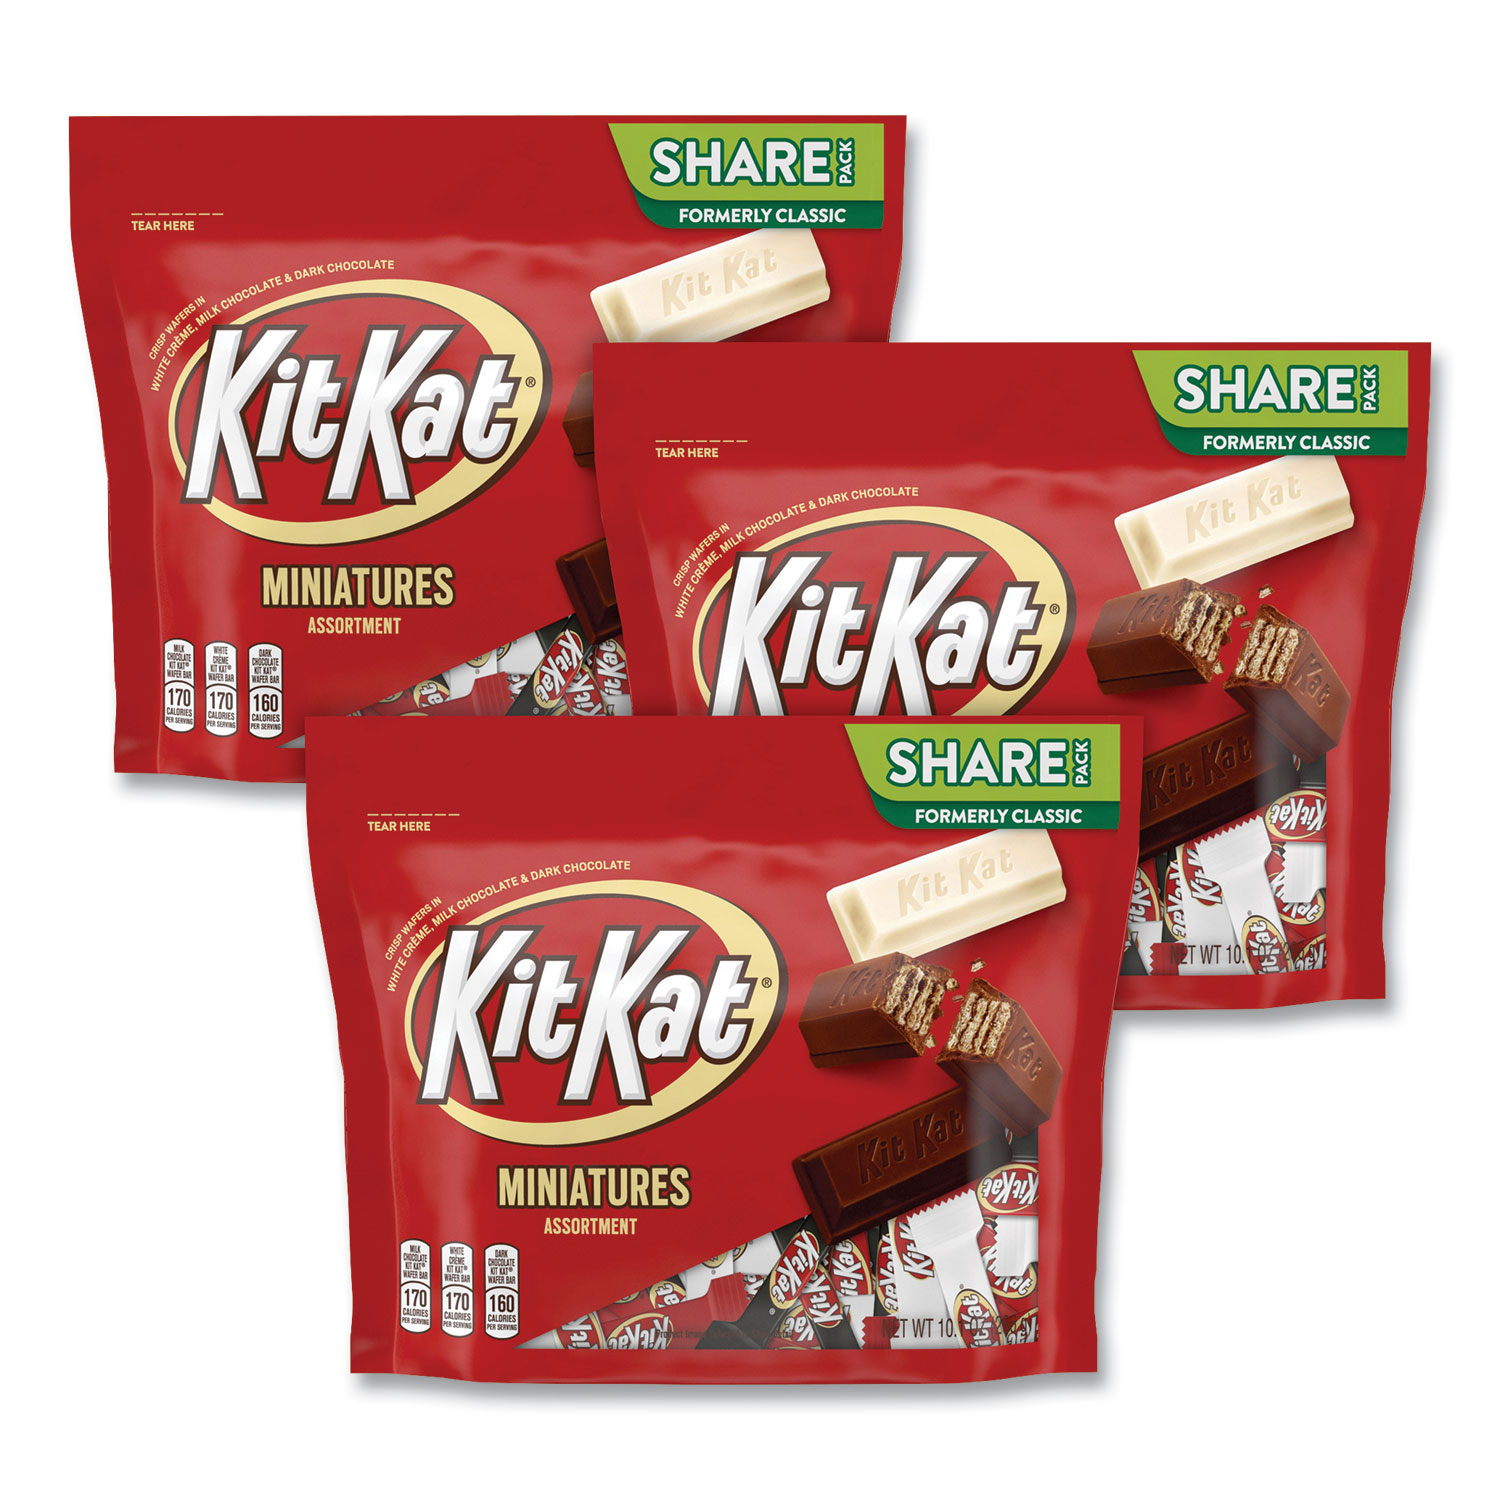  Kit Kat 22672 Miniatures Share Pack Party Bag, Assorted, 10.1 oz Bag, 3/Pack, Free Delivery in 1-4 Business Days (GRR24600434) 